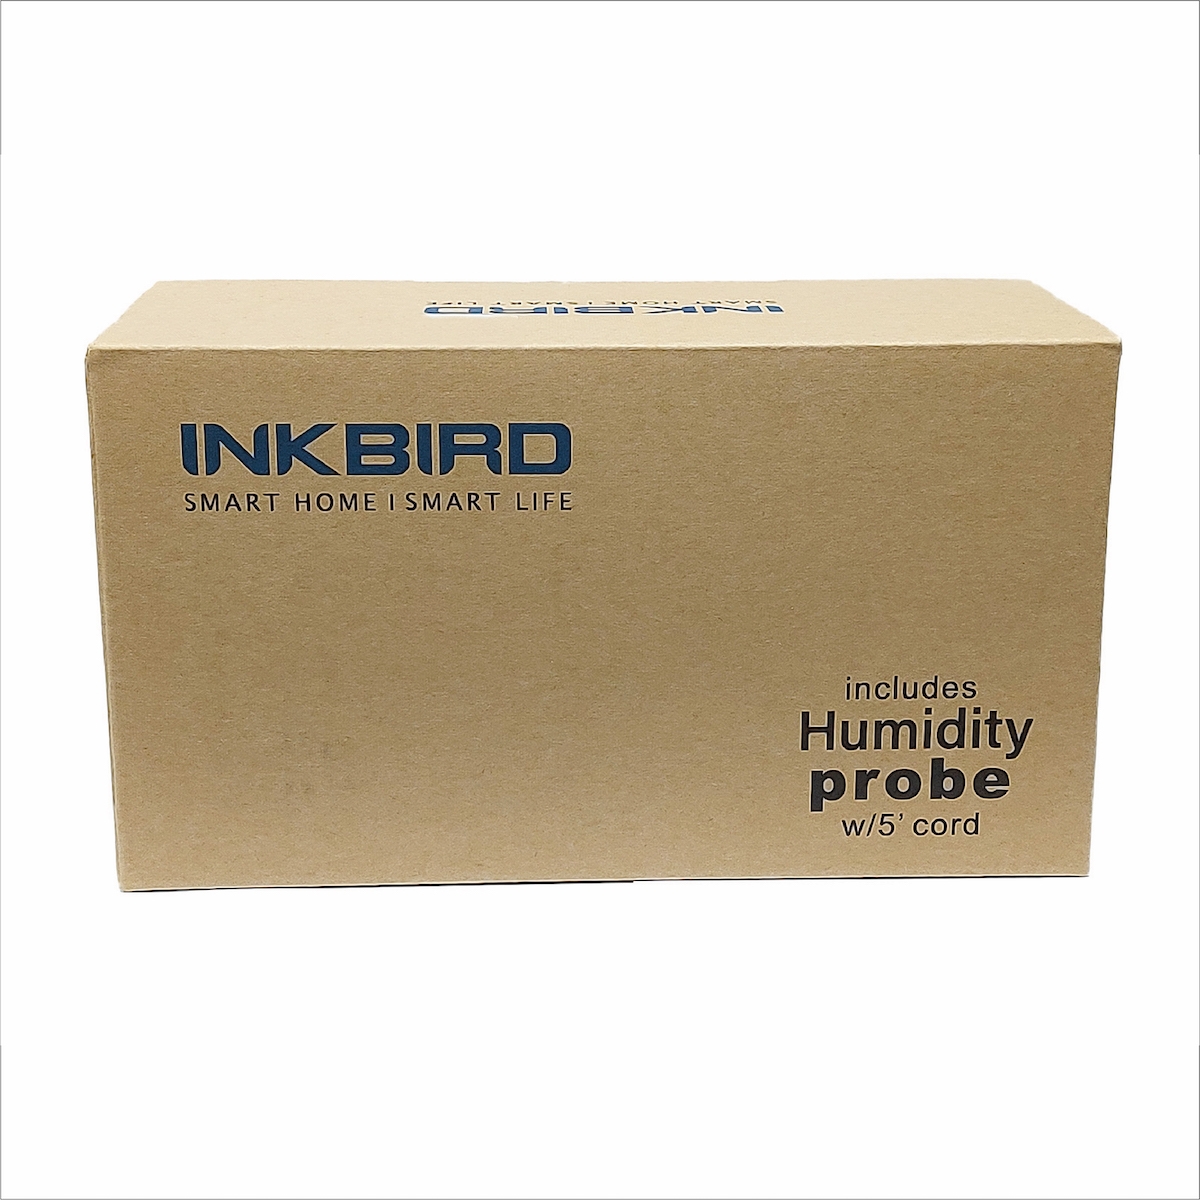 INKBIRD IHC-200: humidity monitoring and management for grow rooms